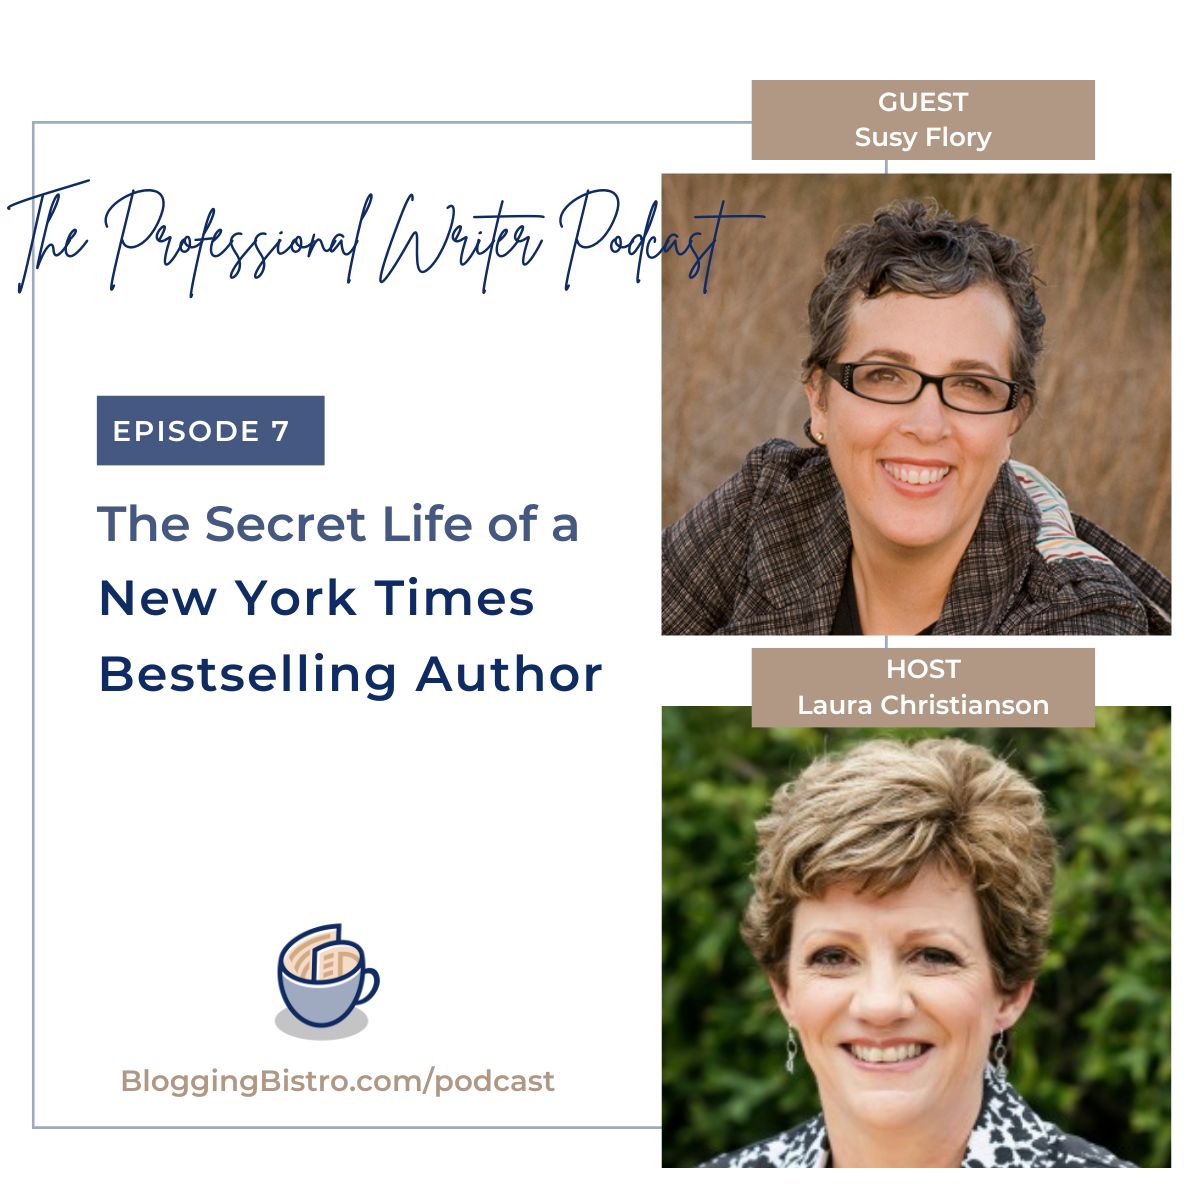 Susy Flory and Laura Christianson on The Professional Writer podcast